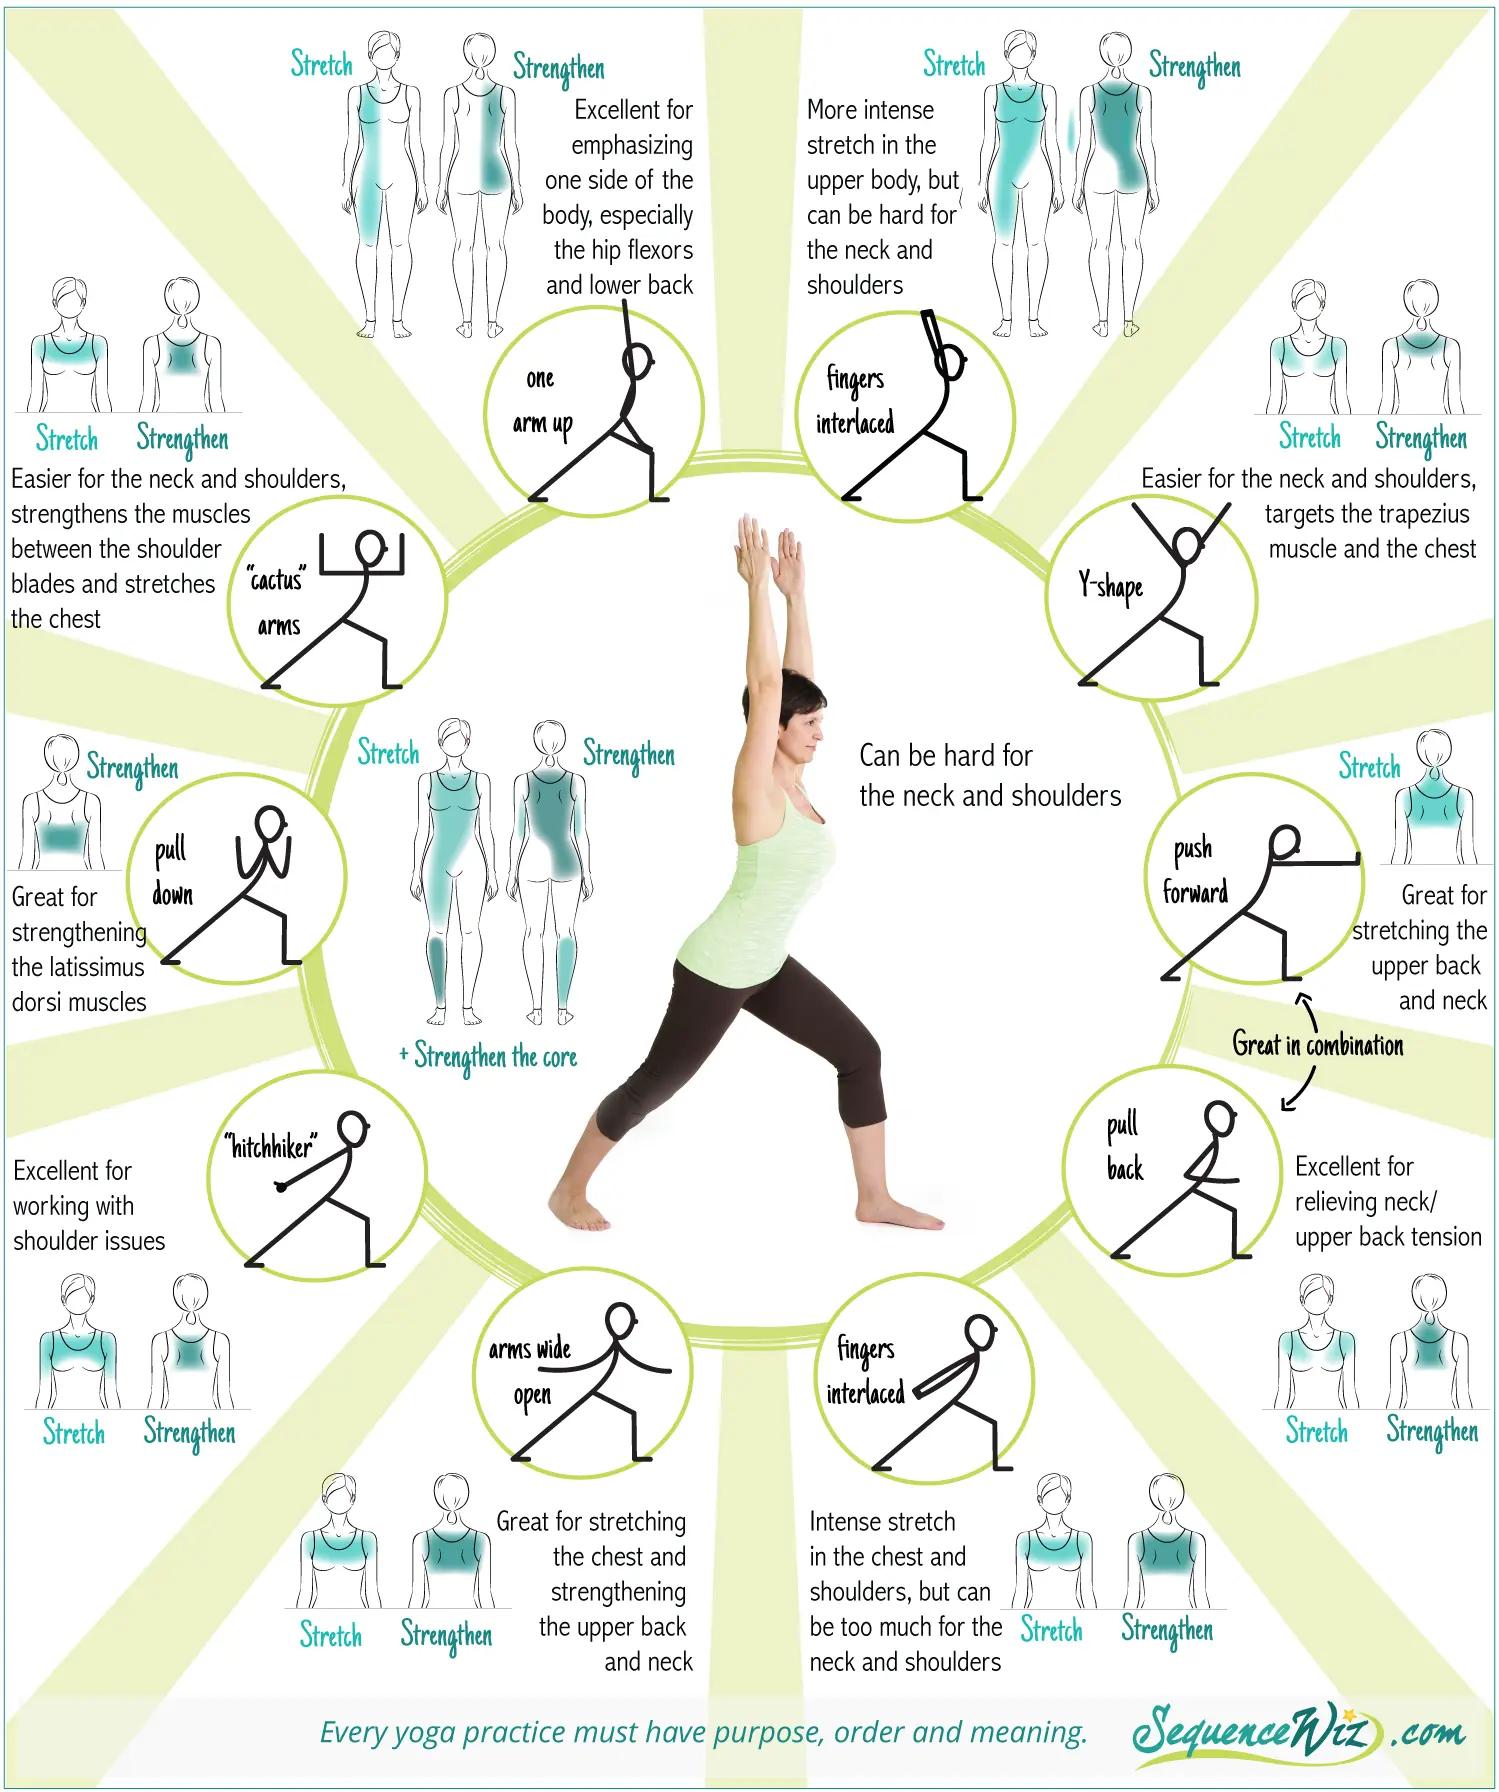 yoga positions meaning - What is the full expression of yoga poses